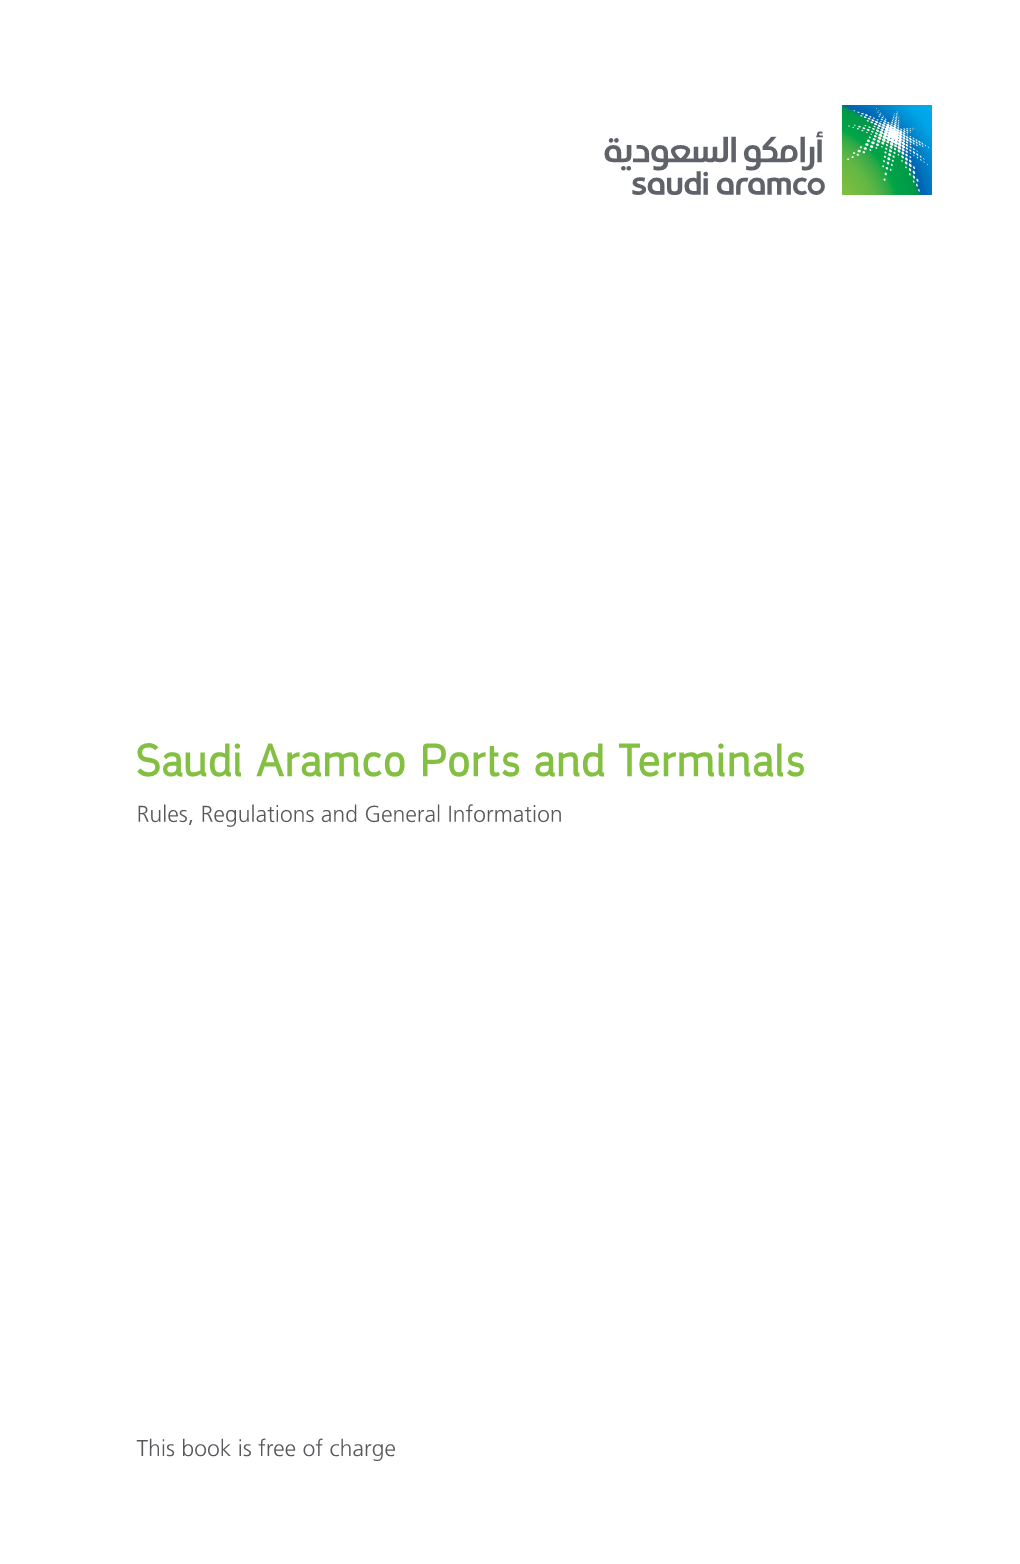 Saudi Aramco Ports and Terminals Rules Regulations and General Information